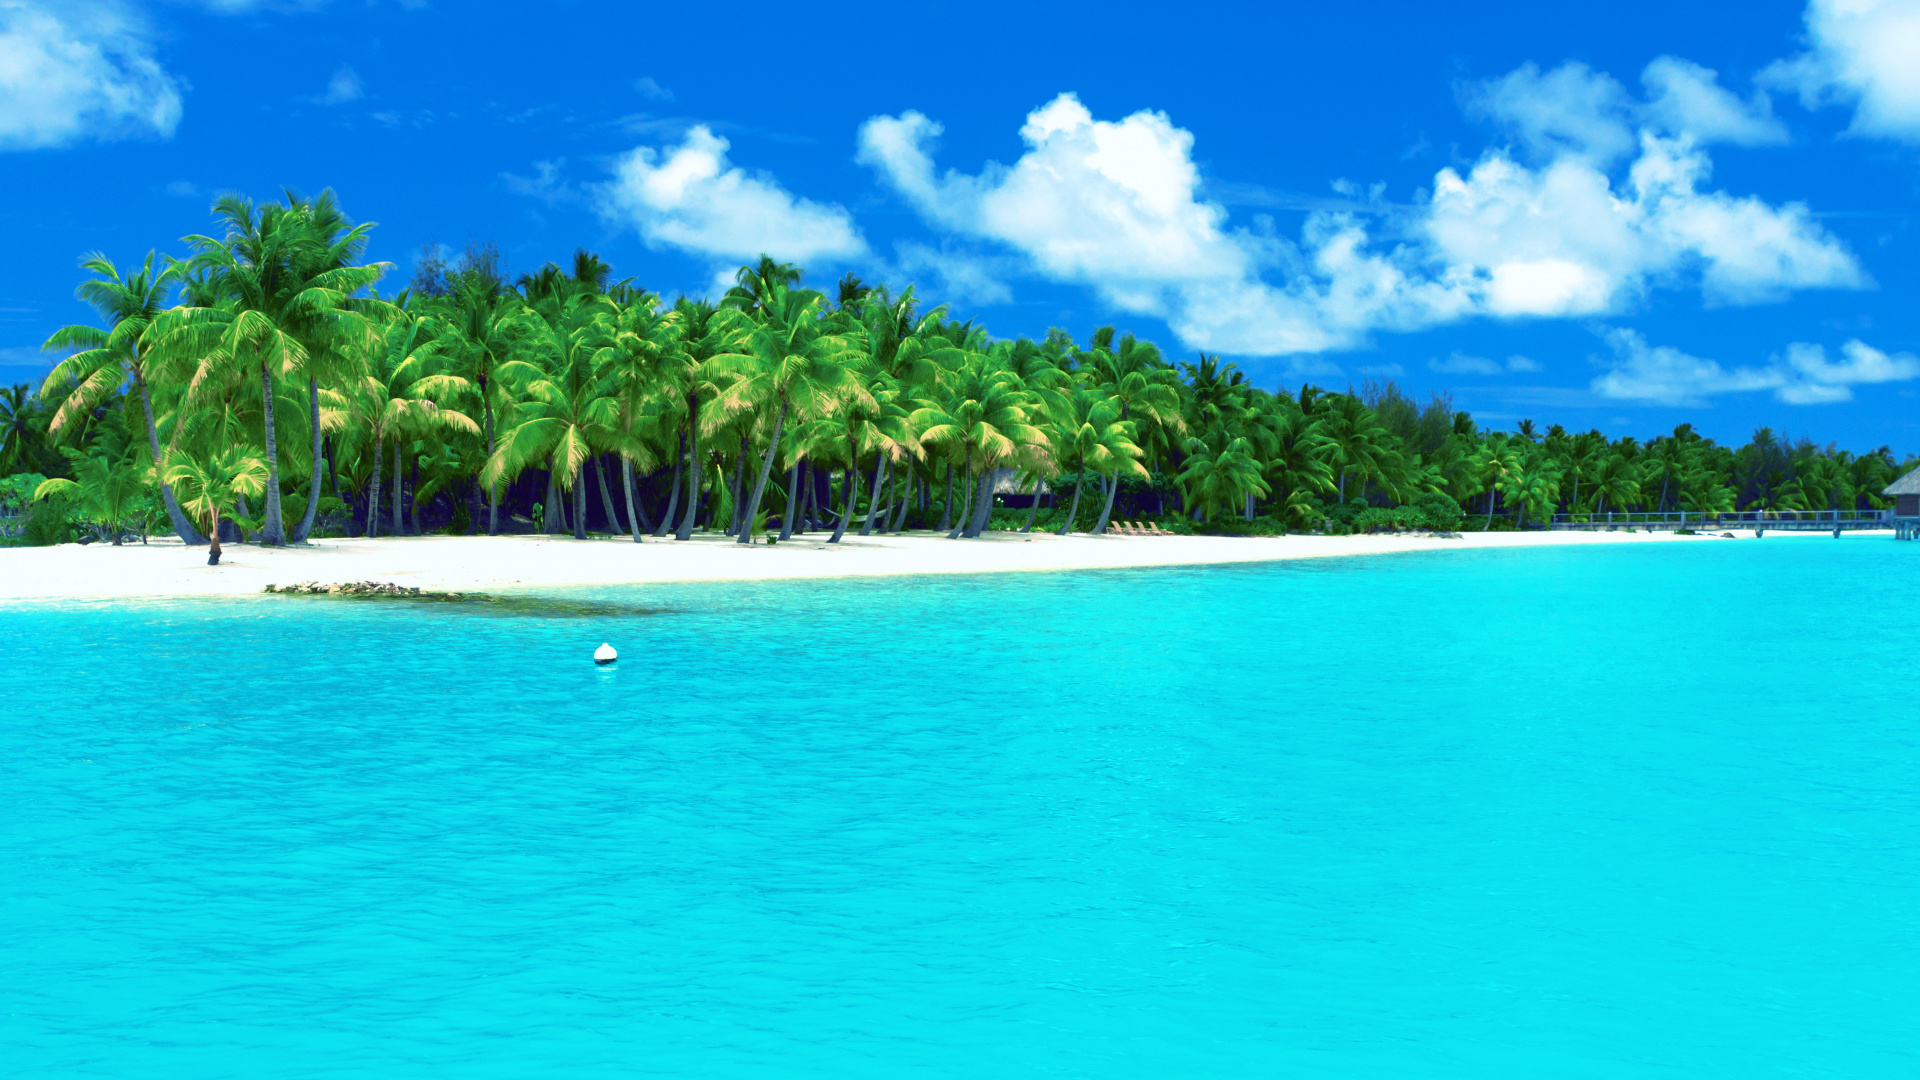 White Sand Beach With Palm Trees on The Side. Wallpaper in 1920x1080 Resolution